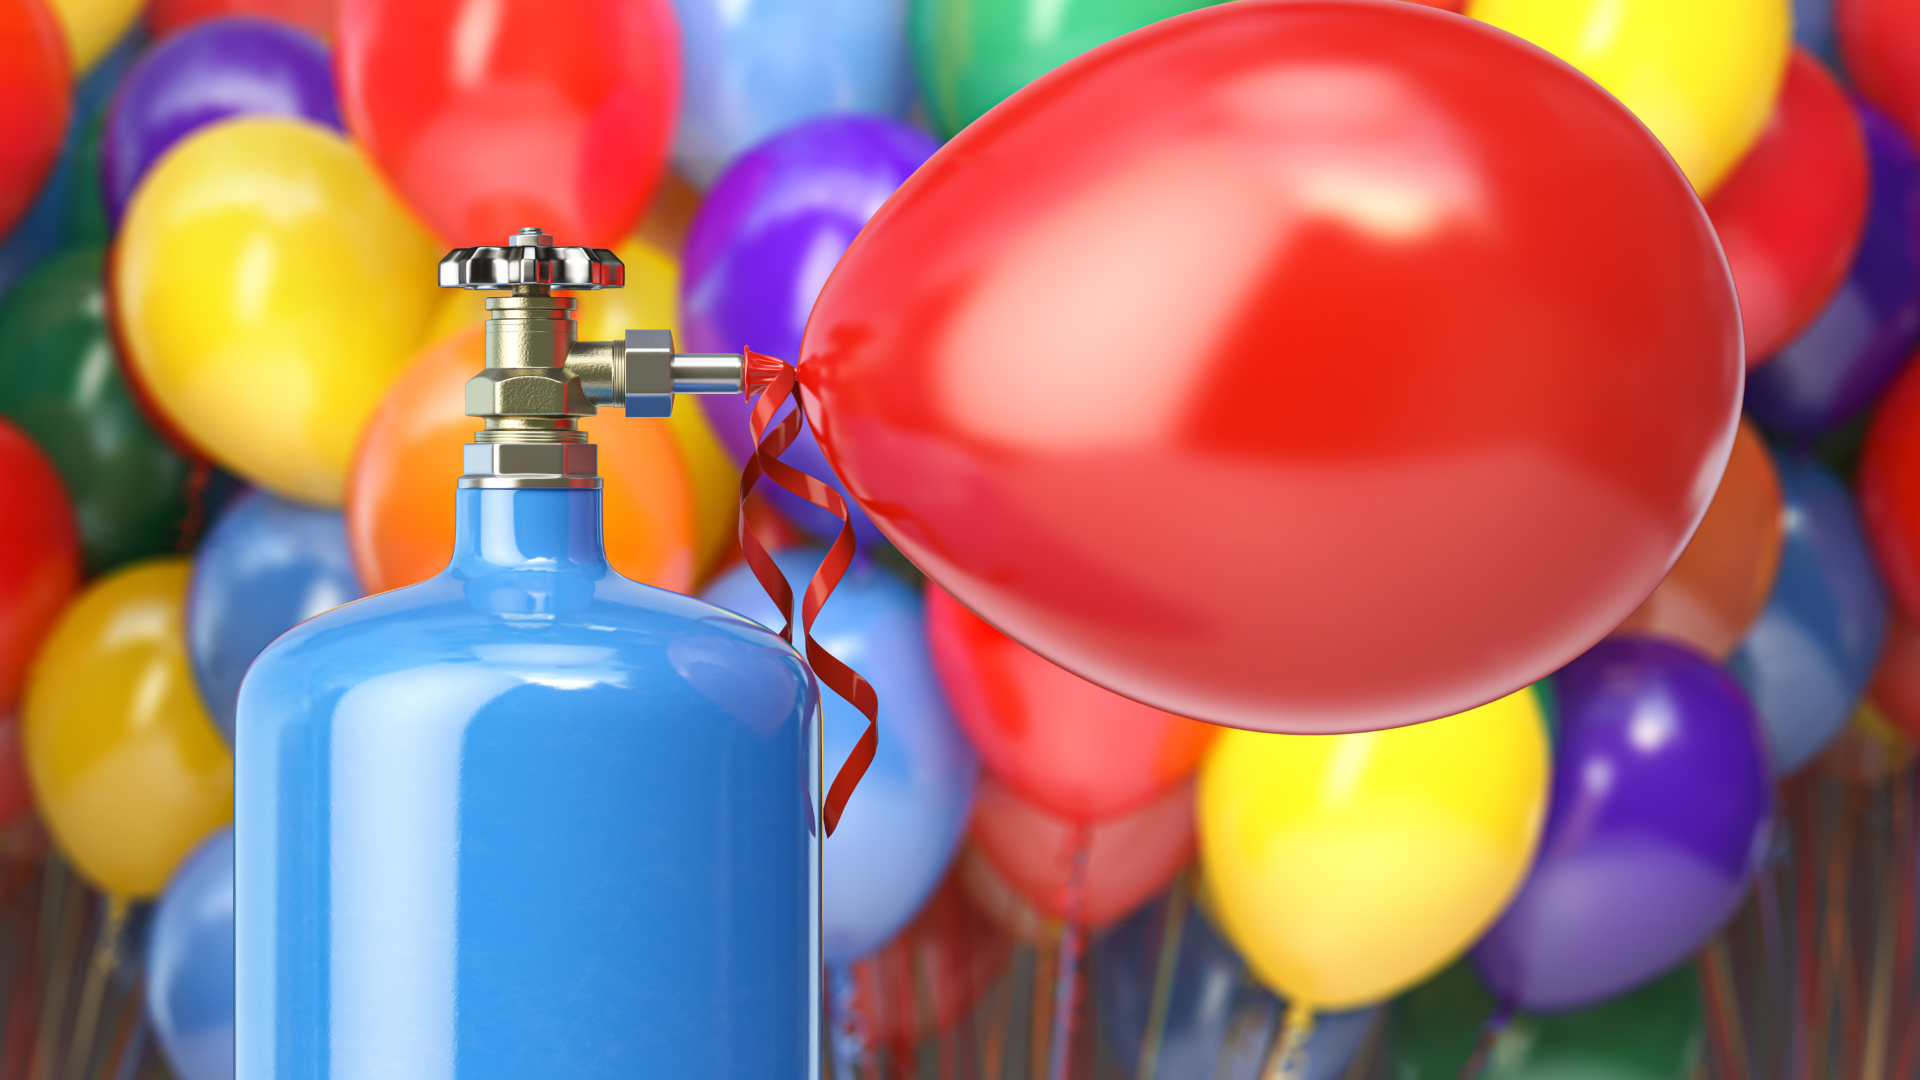 Helium Tanks: Should You Rent or Buy